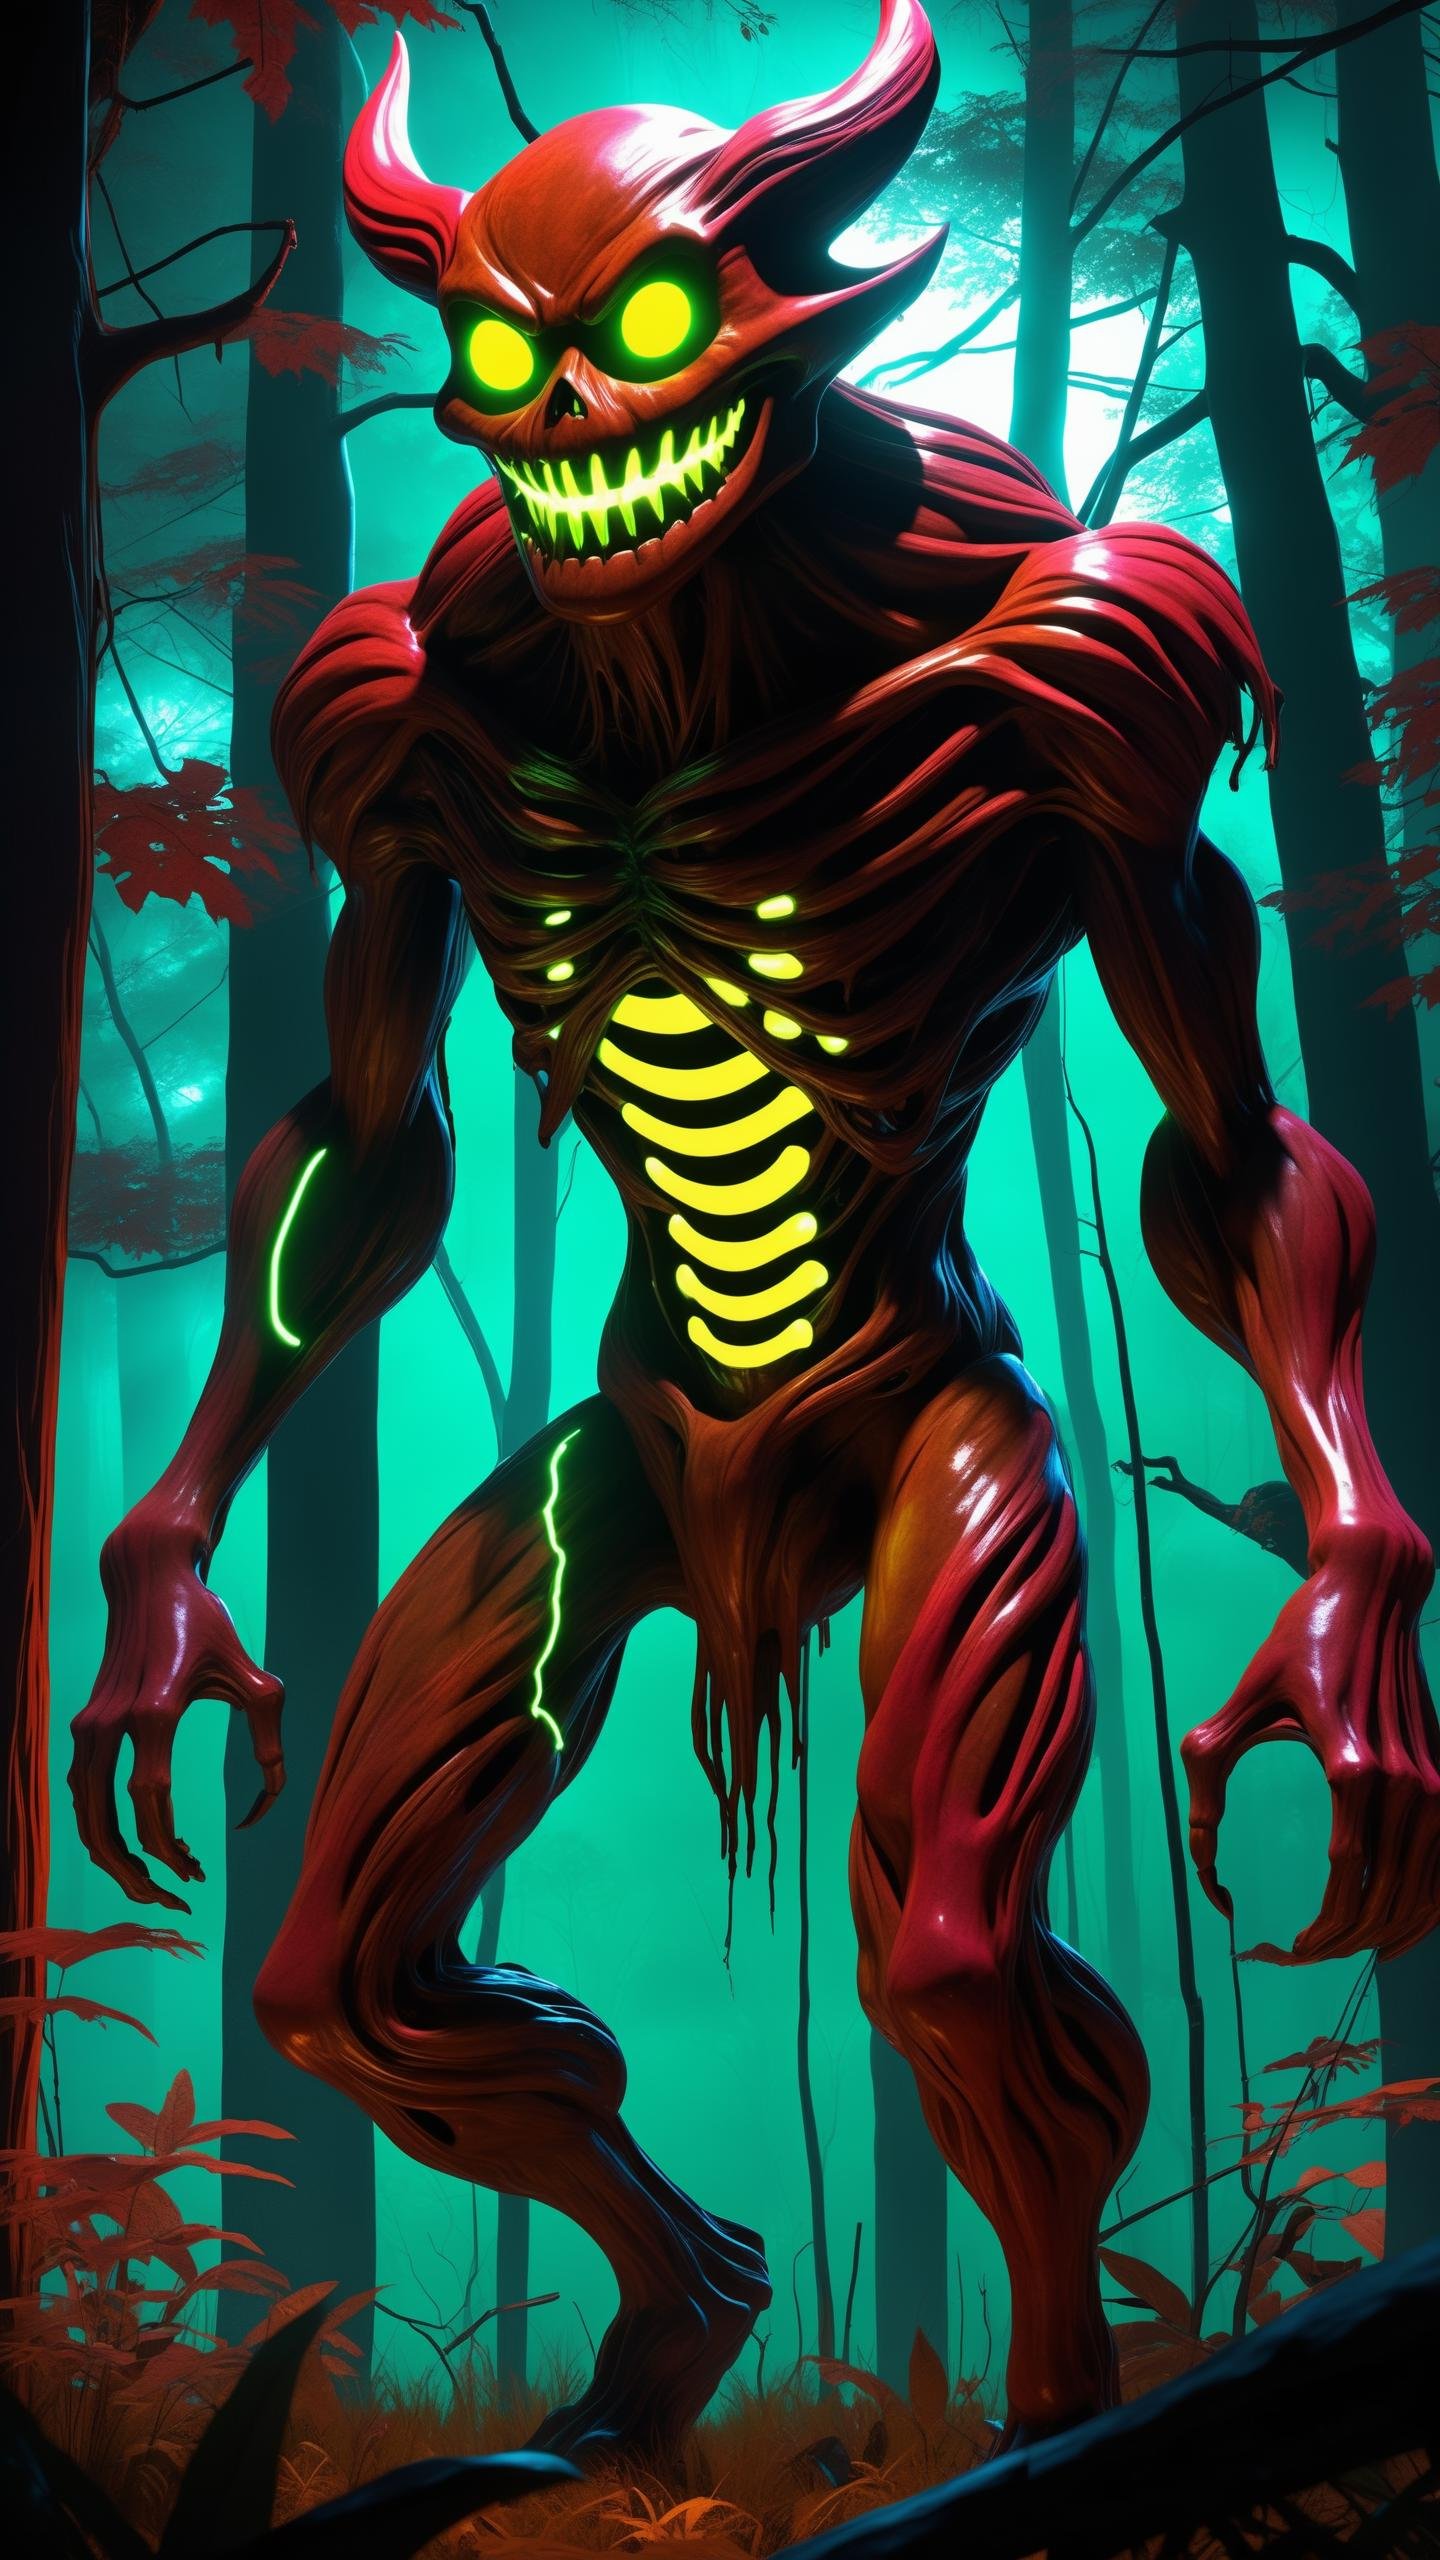 "japanese cartoon style, dark forest, full body, dark desaturated green, deep blood red, rusty brown, (horrific shadow creature:1.25) with blacklight makeup, glowing eyes, yellow smile, (neon leds implanted in skin:1.25), perfect anatomy, horror, creepy, dark, eerie, menacing, supernatural, monster, nightmare, masterpiece, best quality, highly detailed, sharp focus, dynamic lighting, vivid colors, texture detail, particle effects, storytelling elements, narrative flair, 16k, UE5, HDR, subject-background isolation